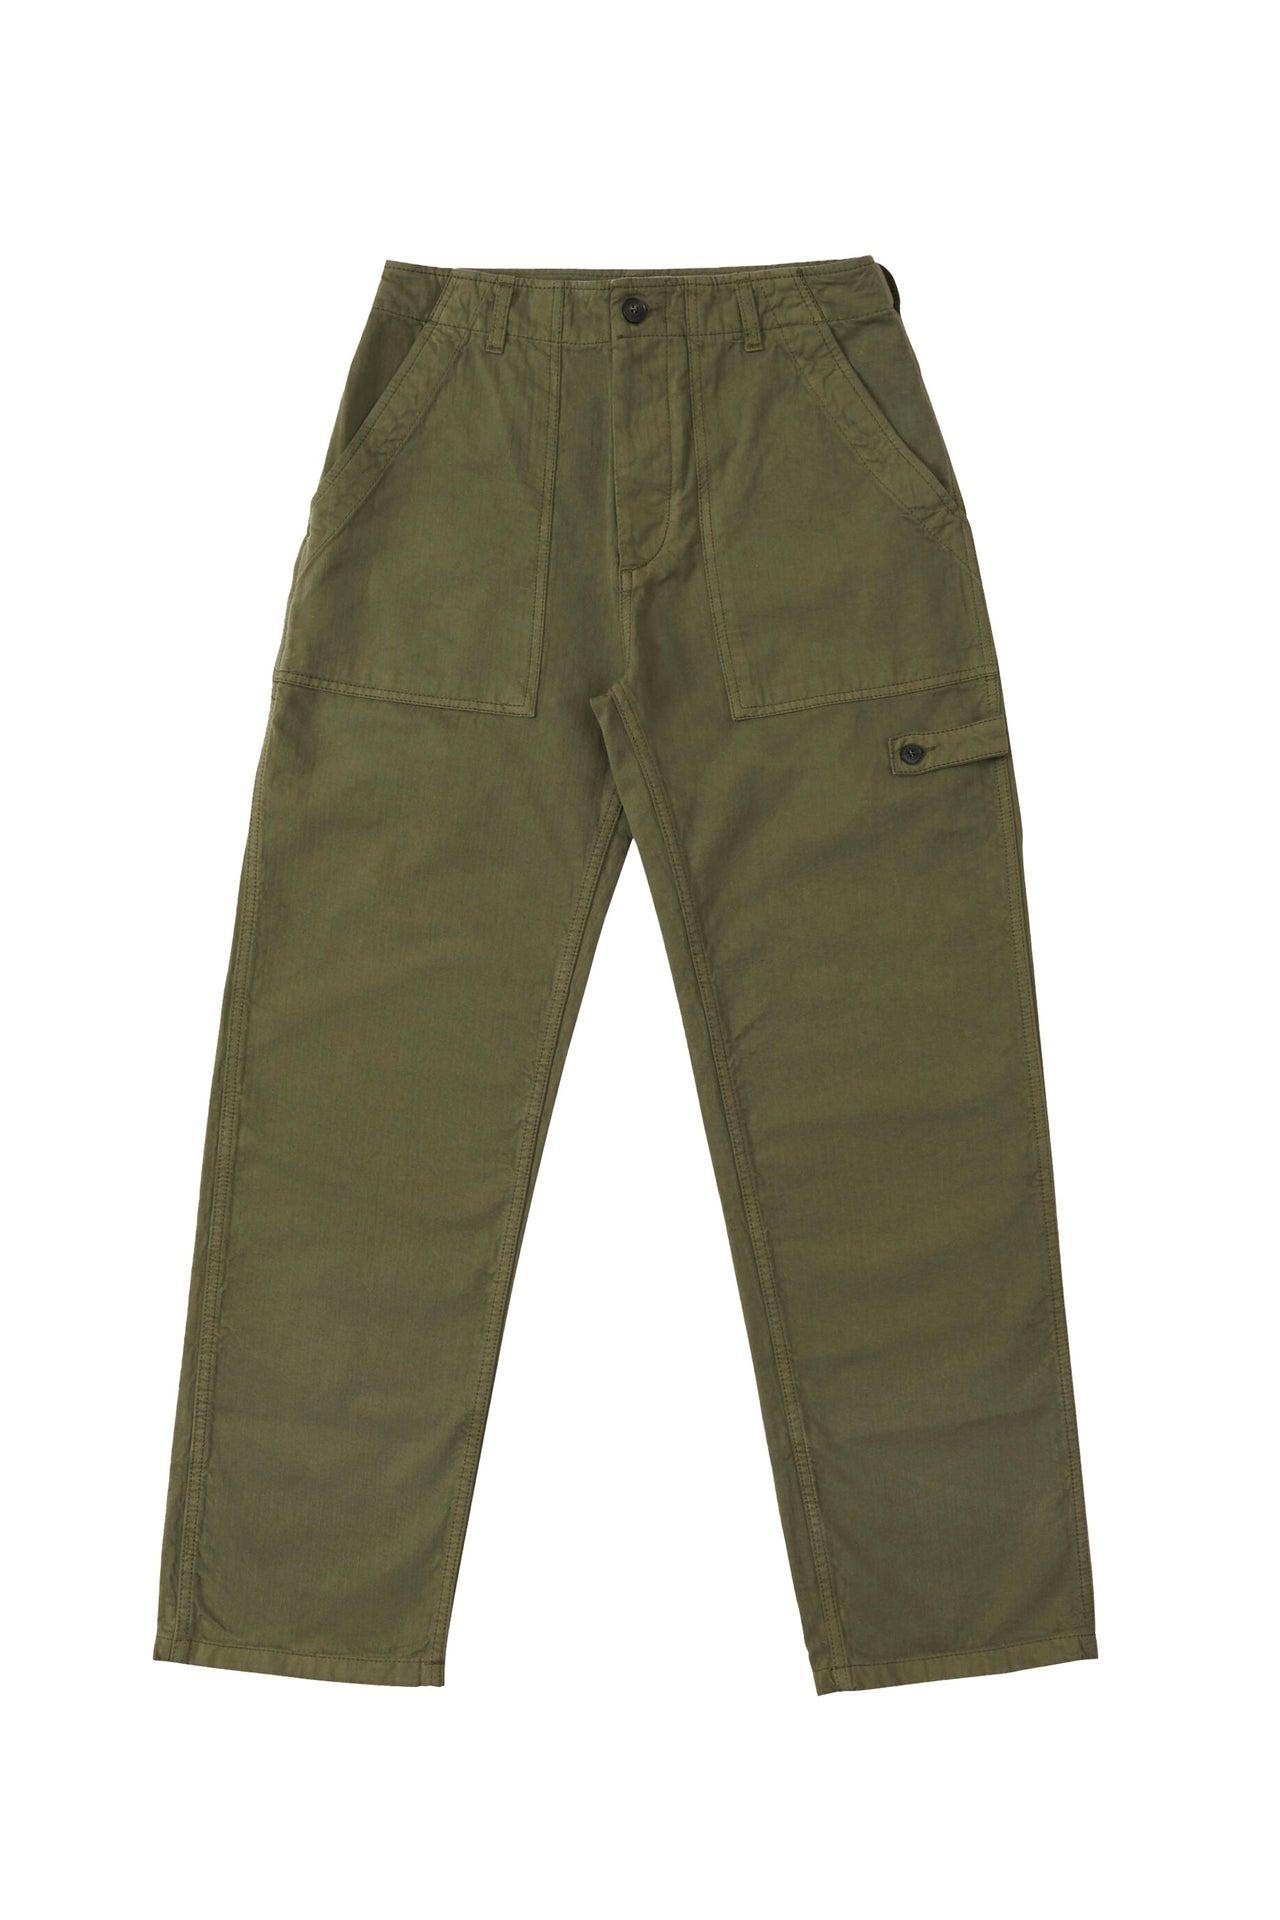 W-JERRY/T Green Pants-Pant-Fortela-Debs Boutique